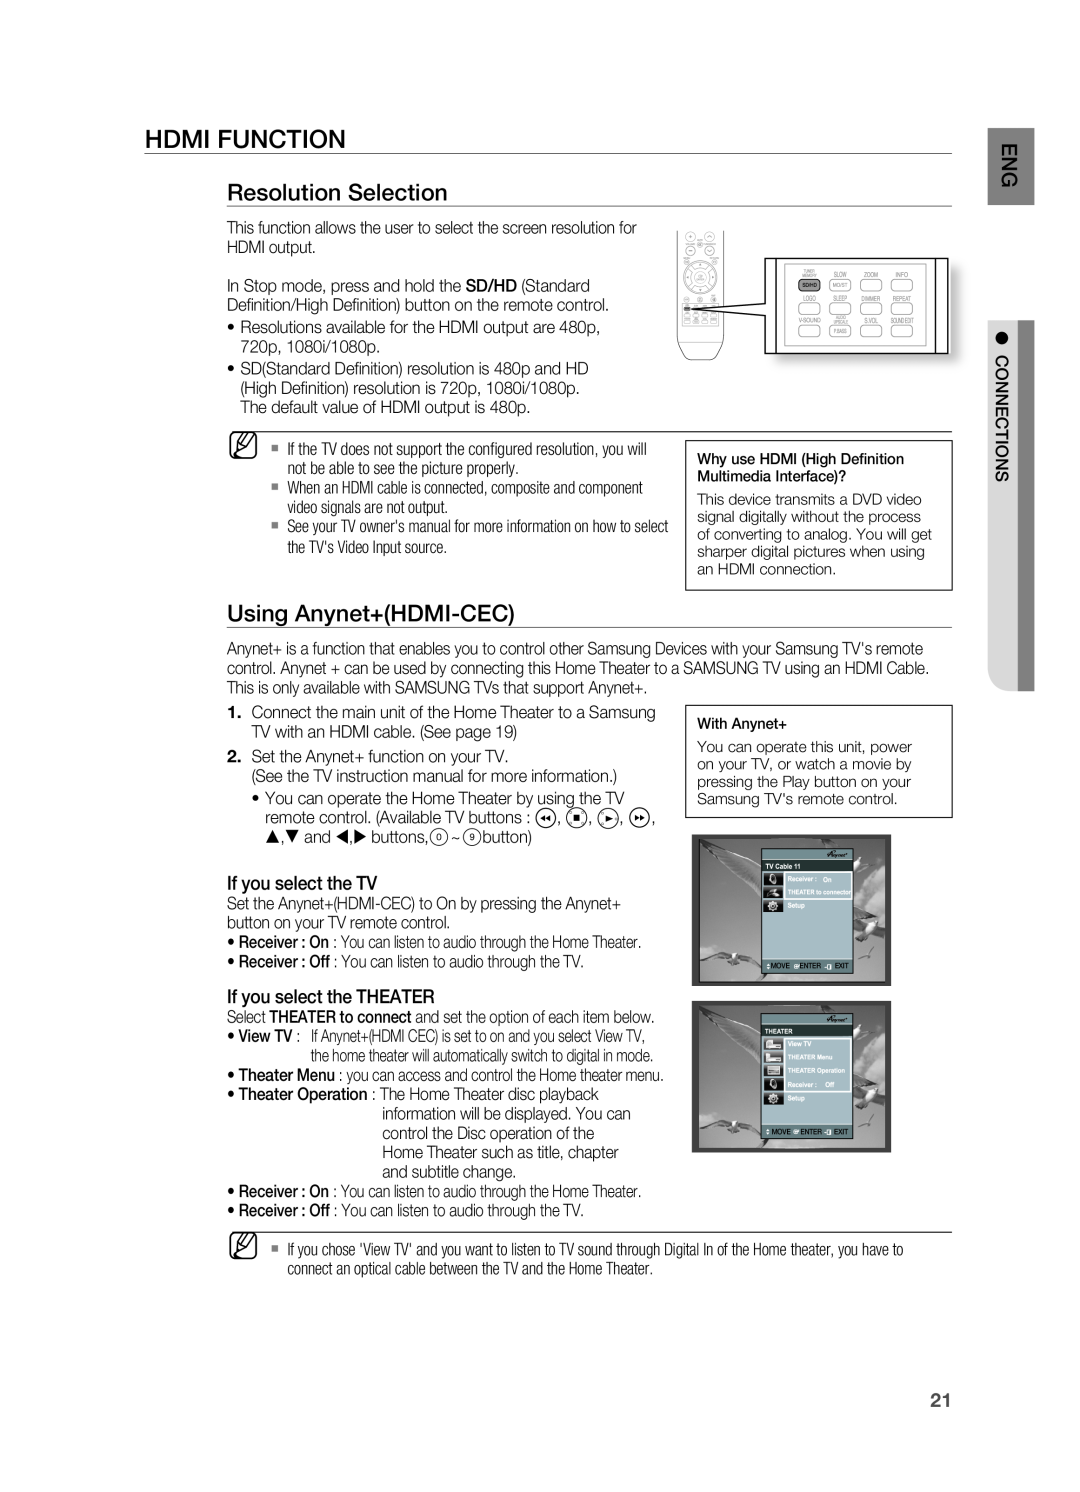 Samsung HT-X810 user manual Hdmi Function, resolution Selection, Using Anynet+HDMI-CEC 